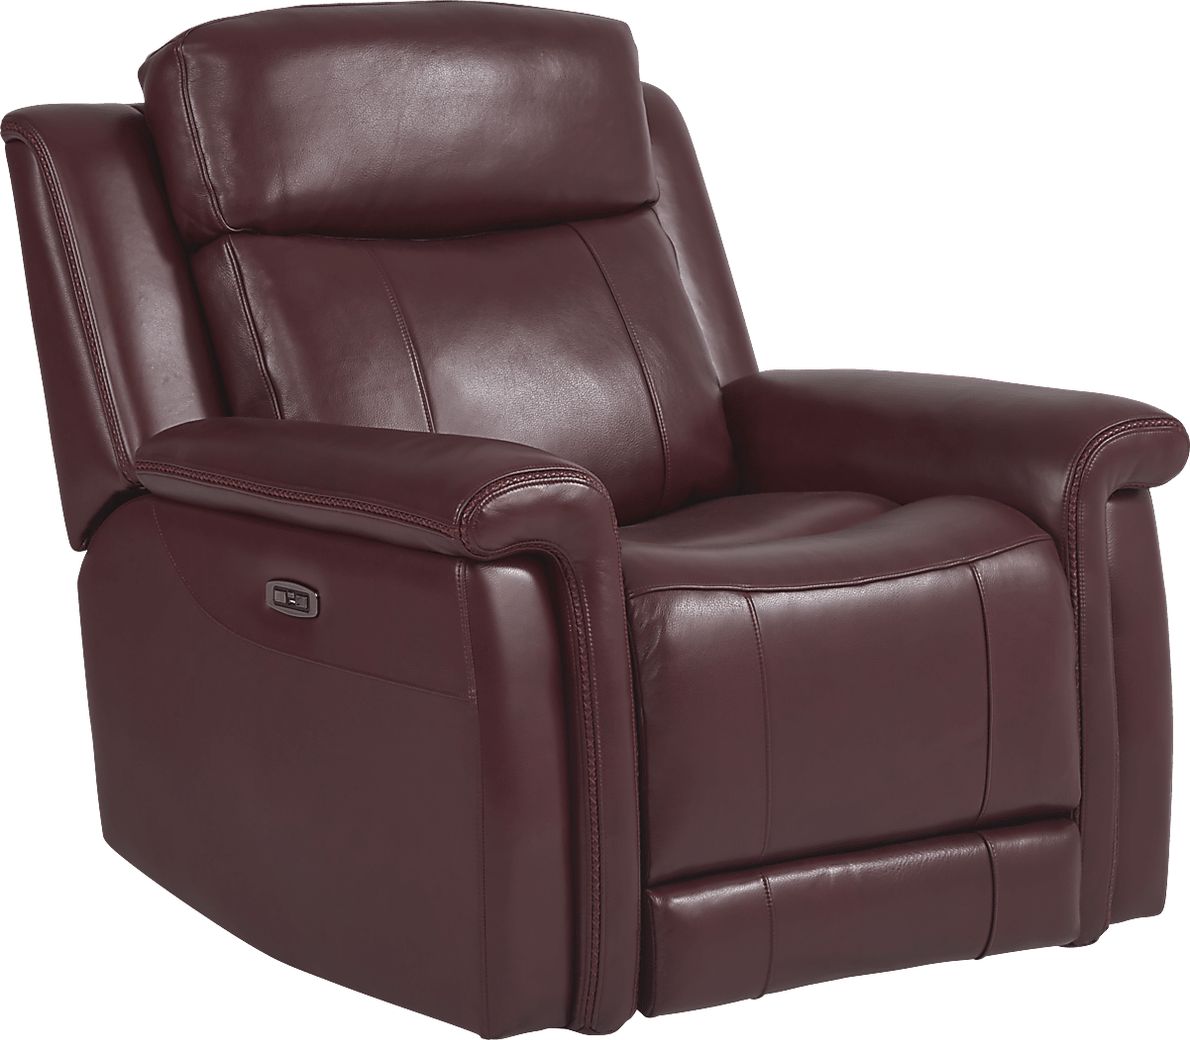 Orsini Leather Dual Power Recliner